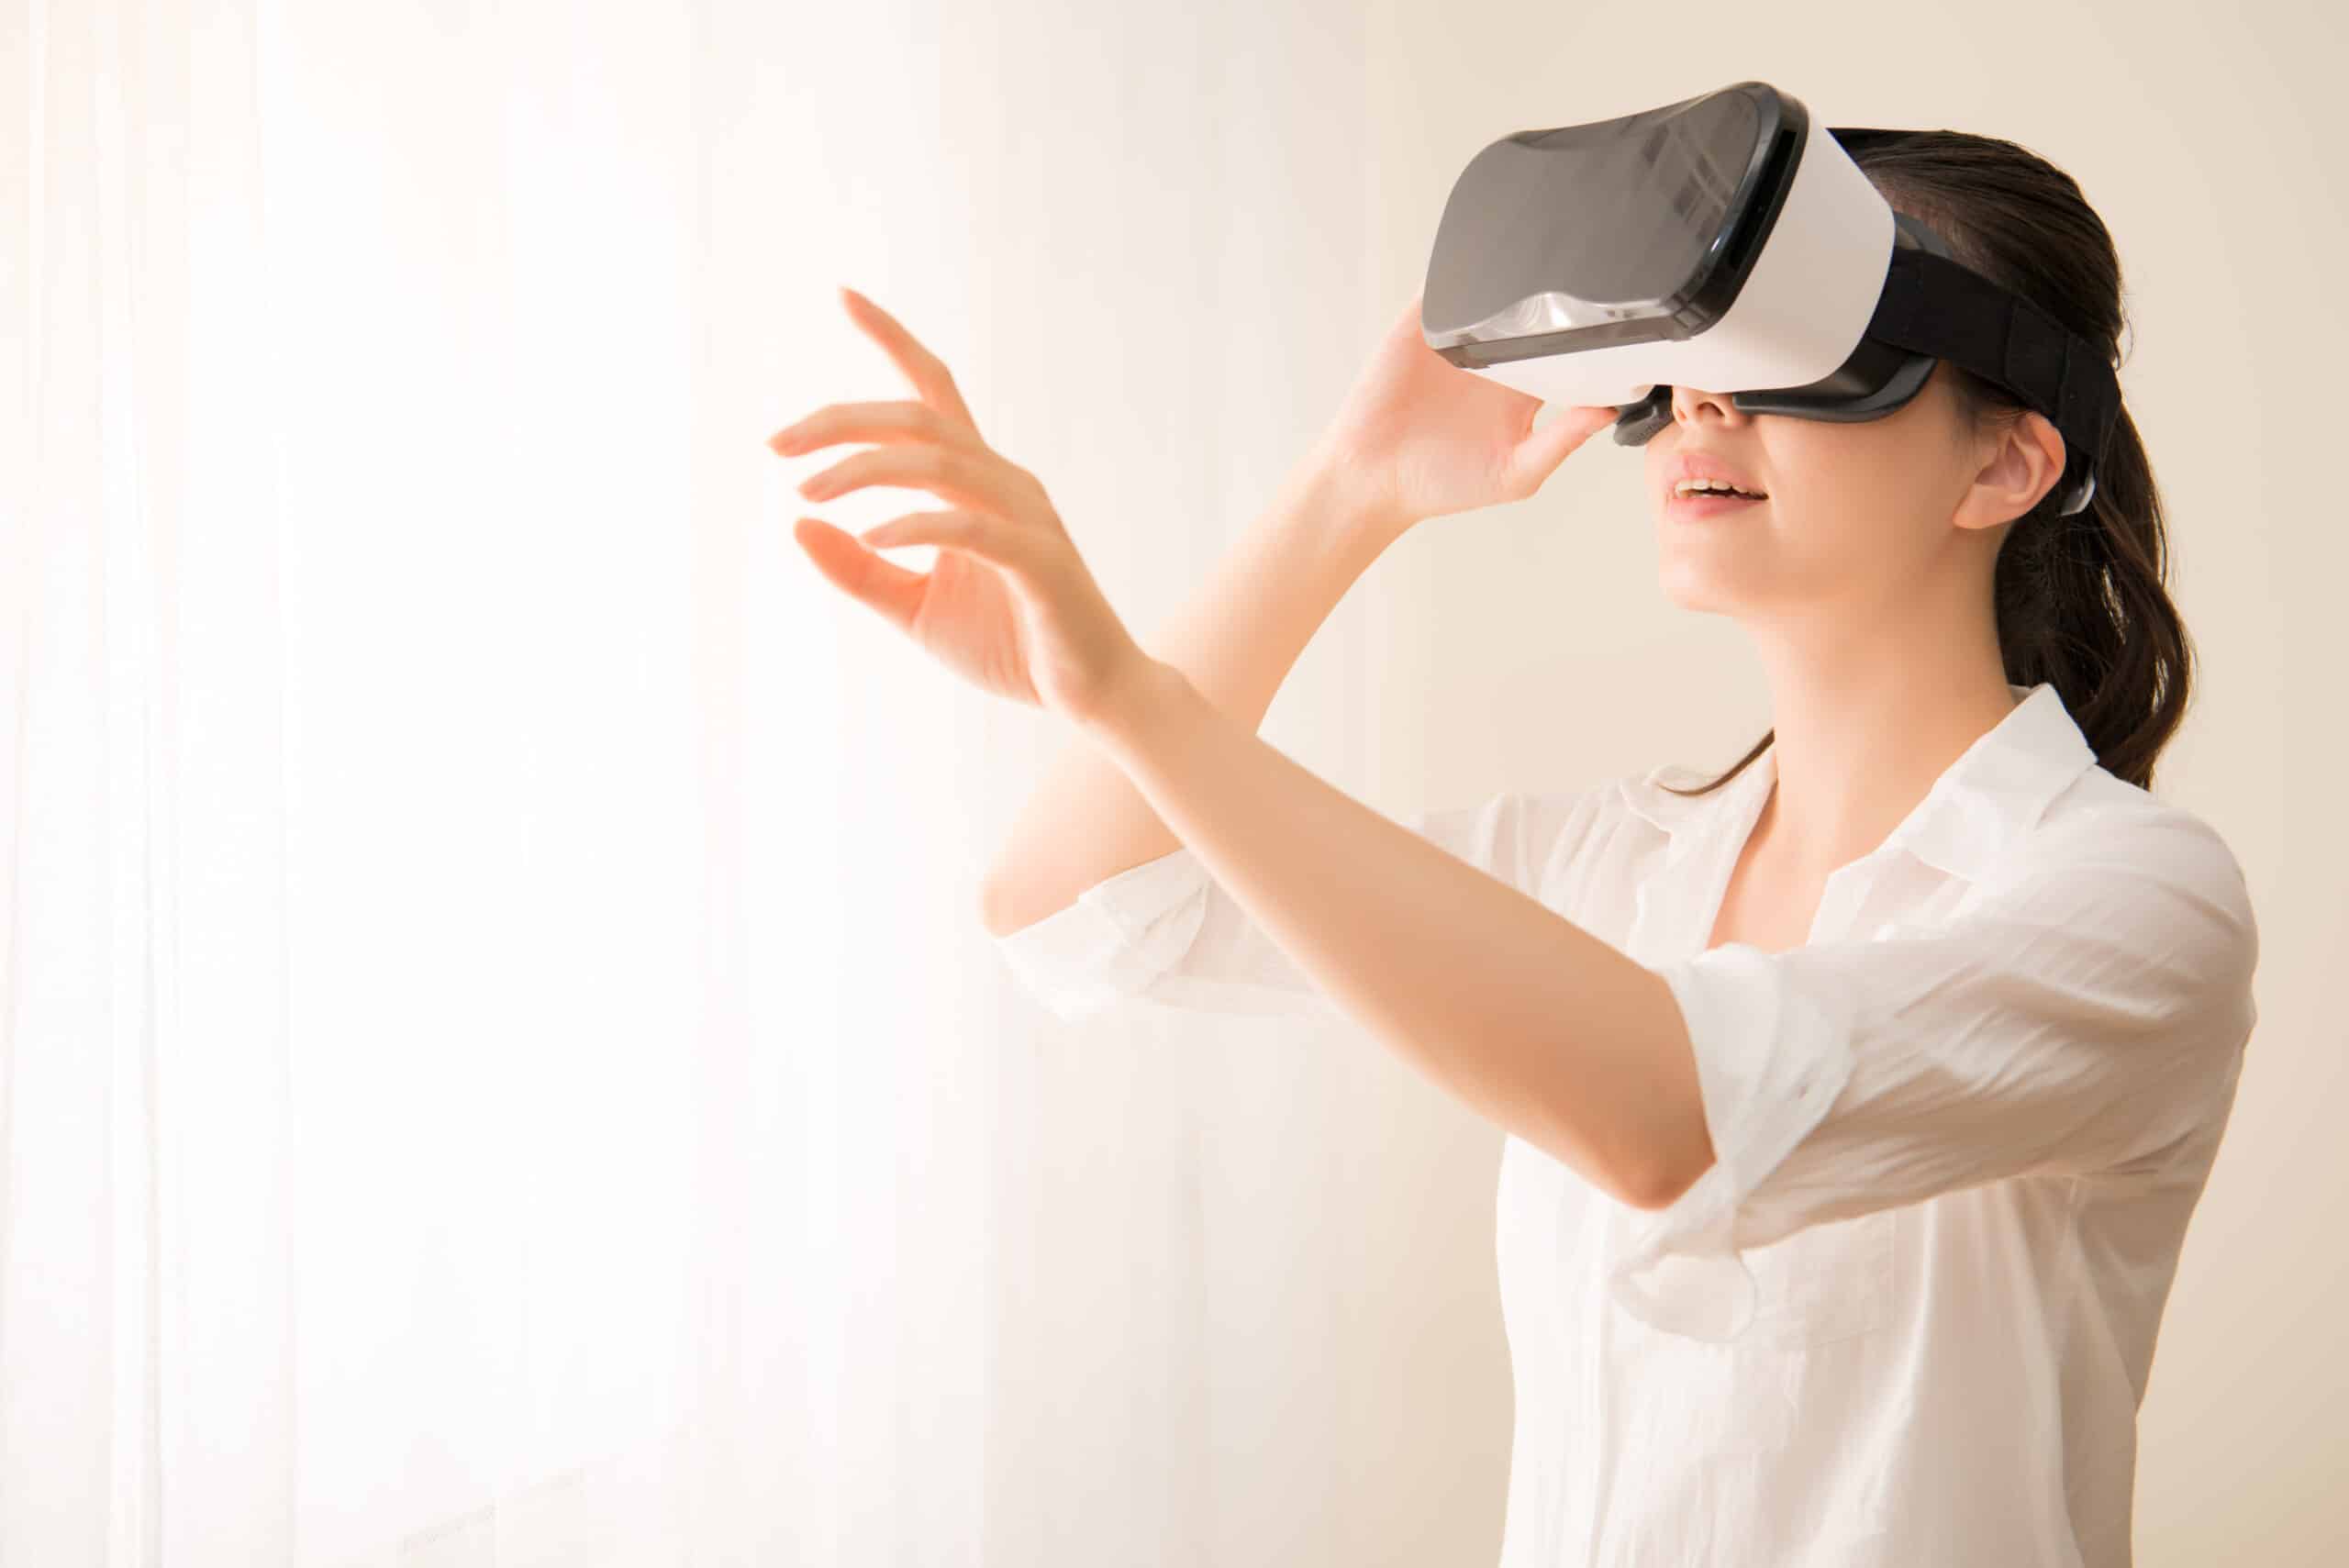 An image of a woman using a virtual reality headset.